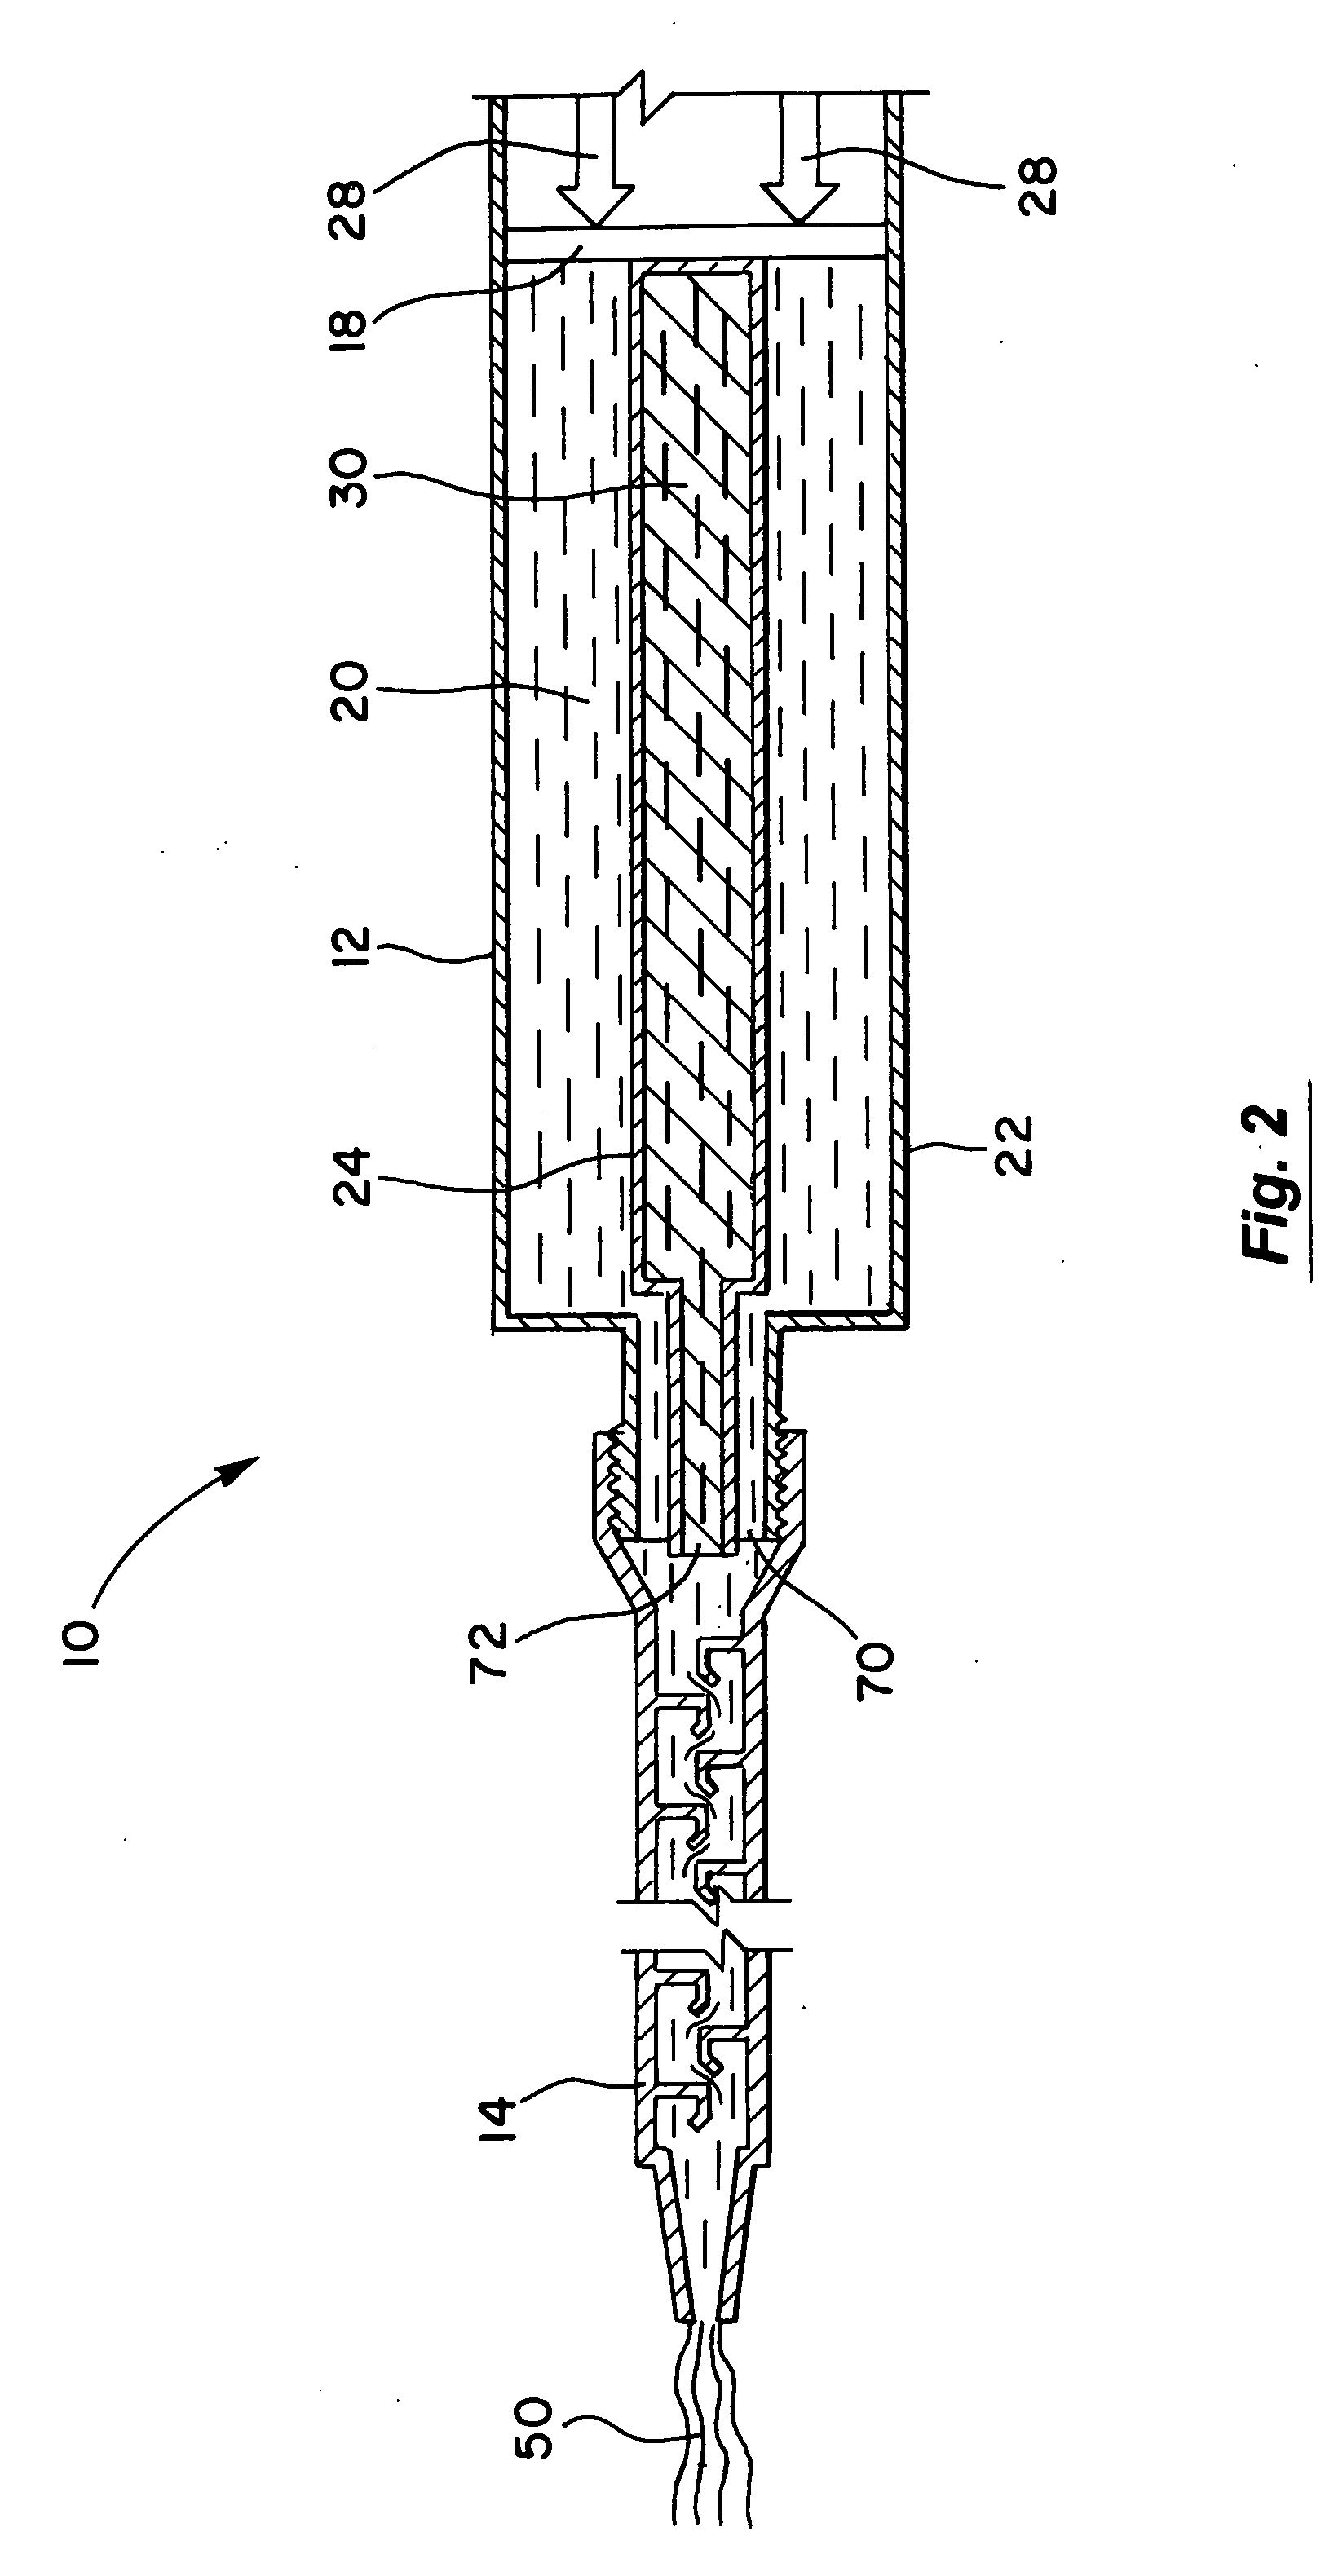 Apparatus and methods for mixing caulk and colorant